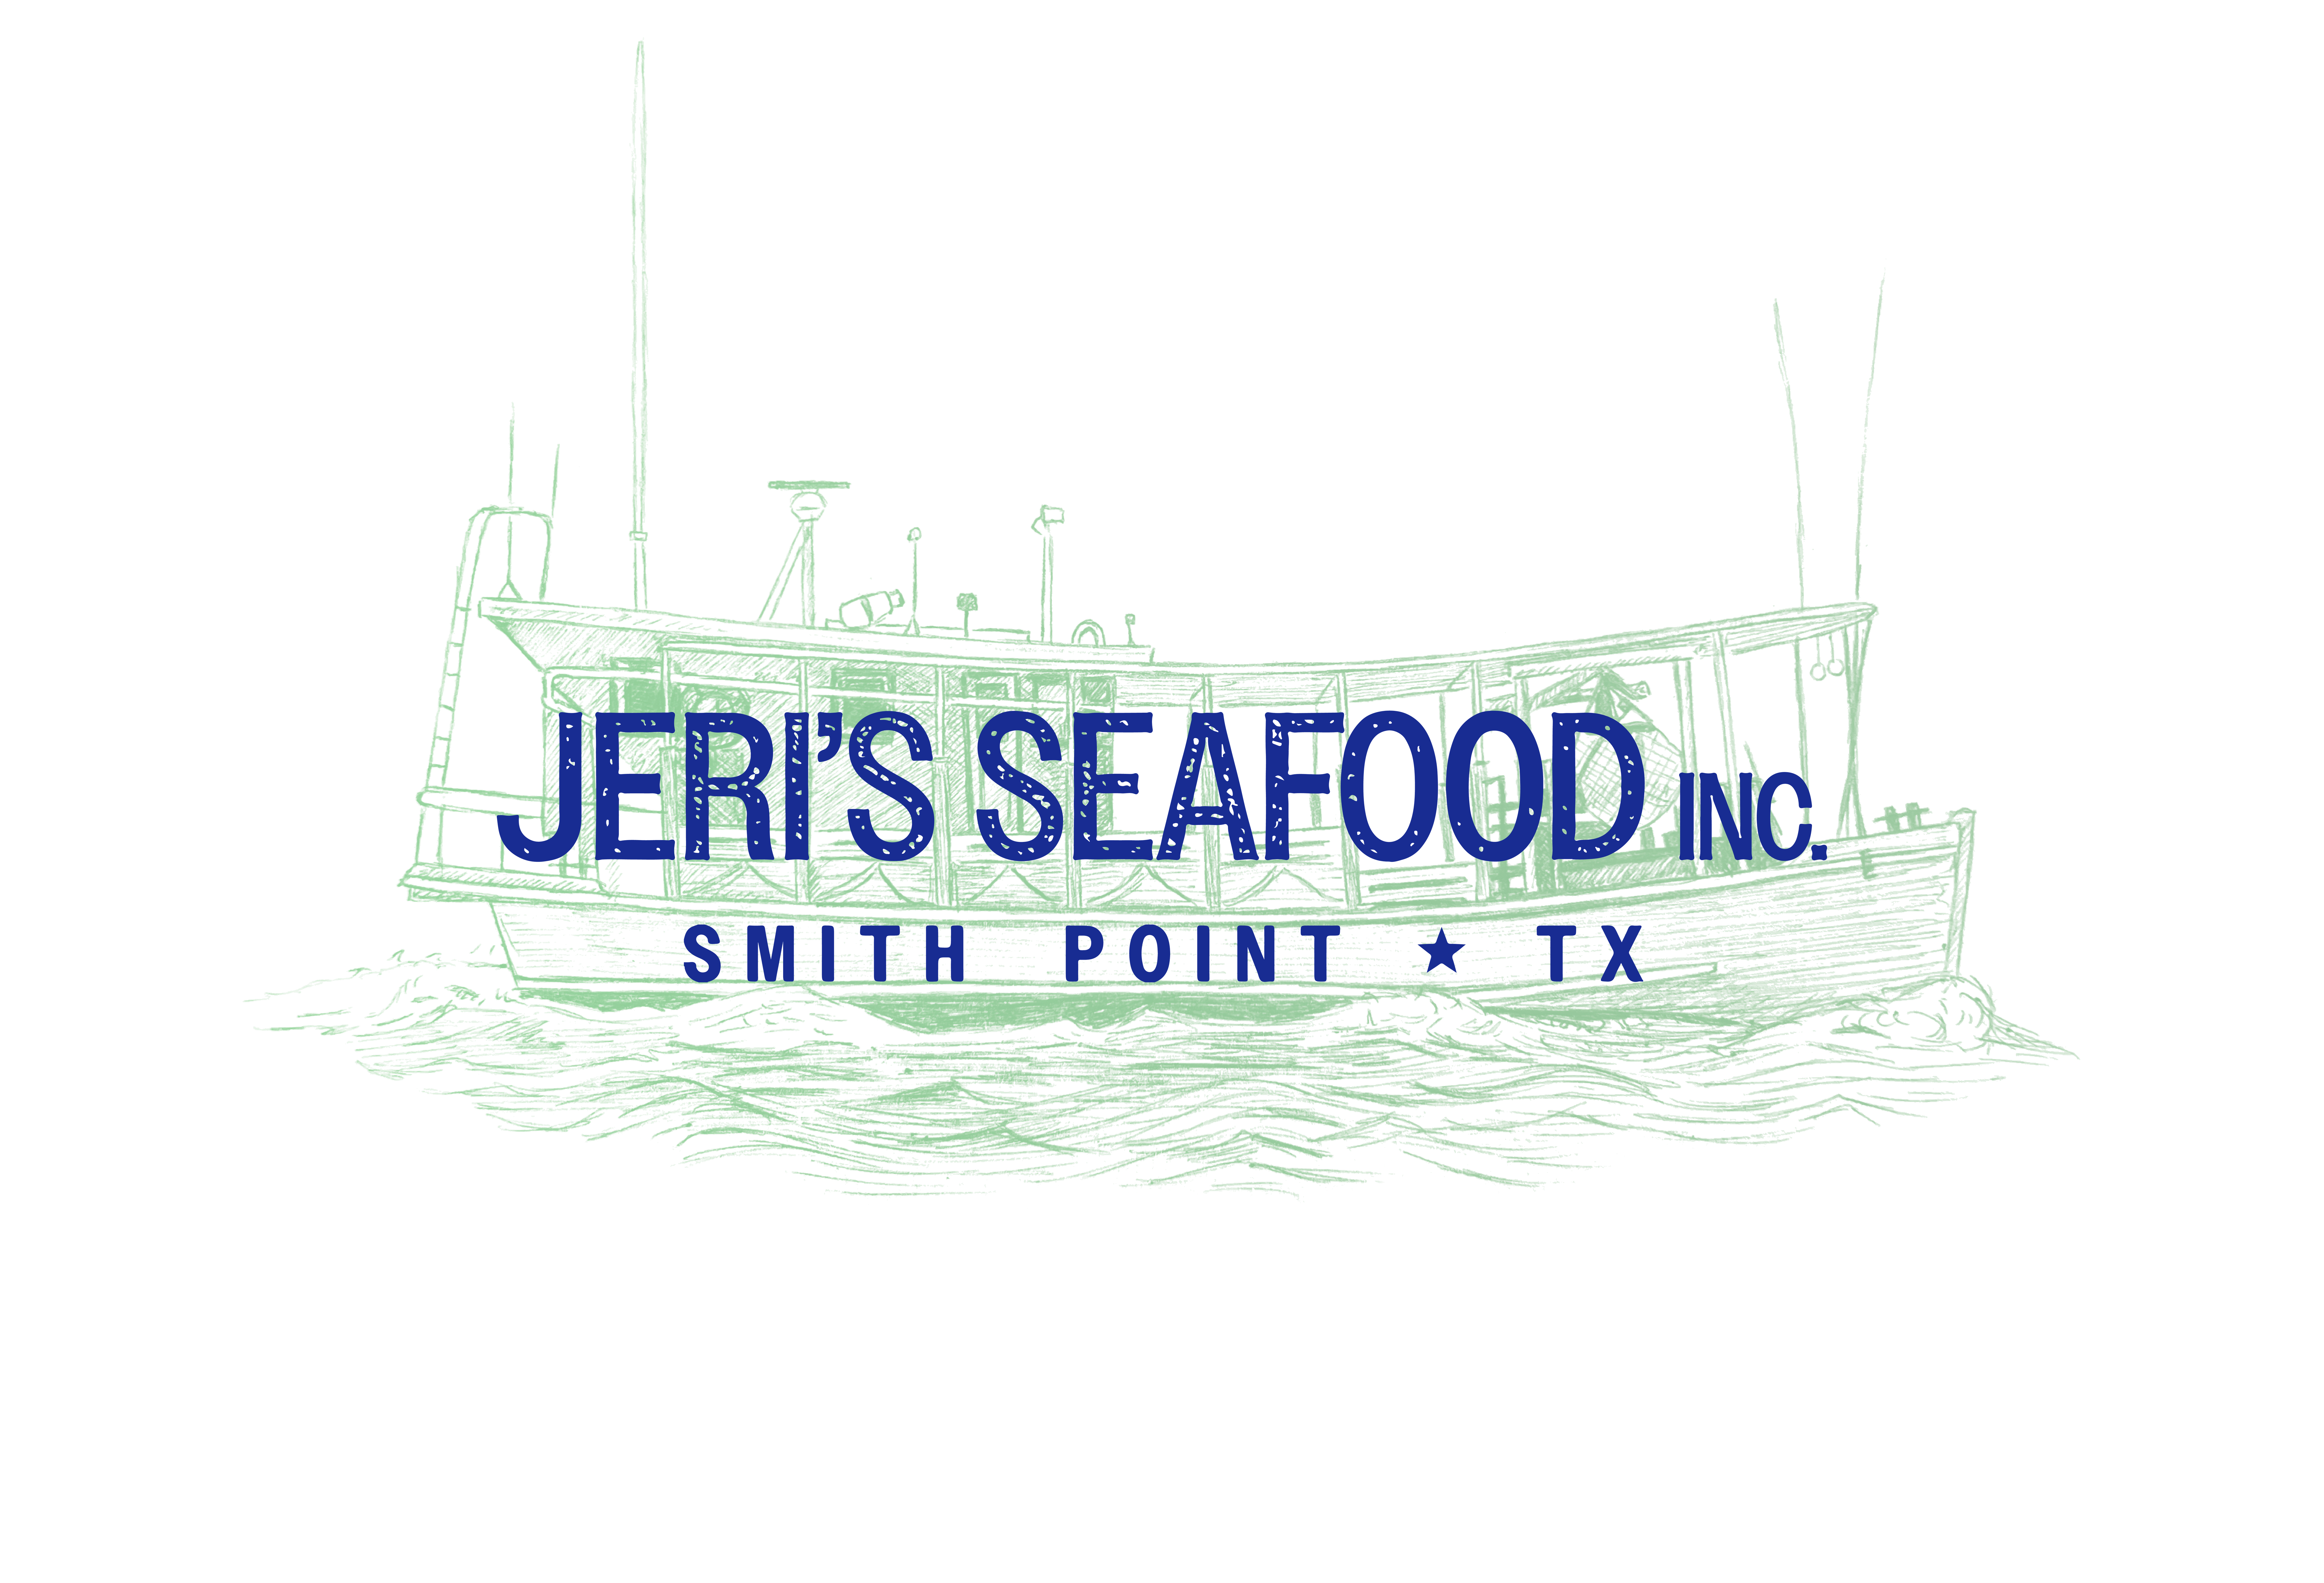 JER-230315-LogoSeafood_Boat-Text-Blue638309924805625242